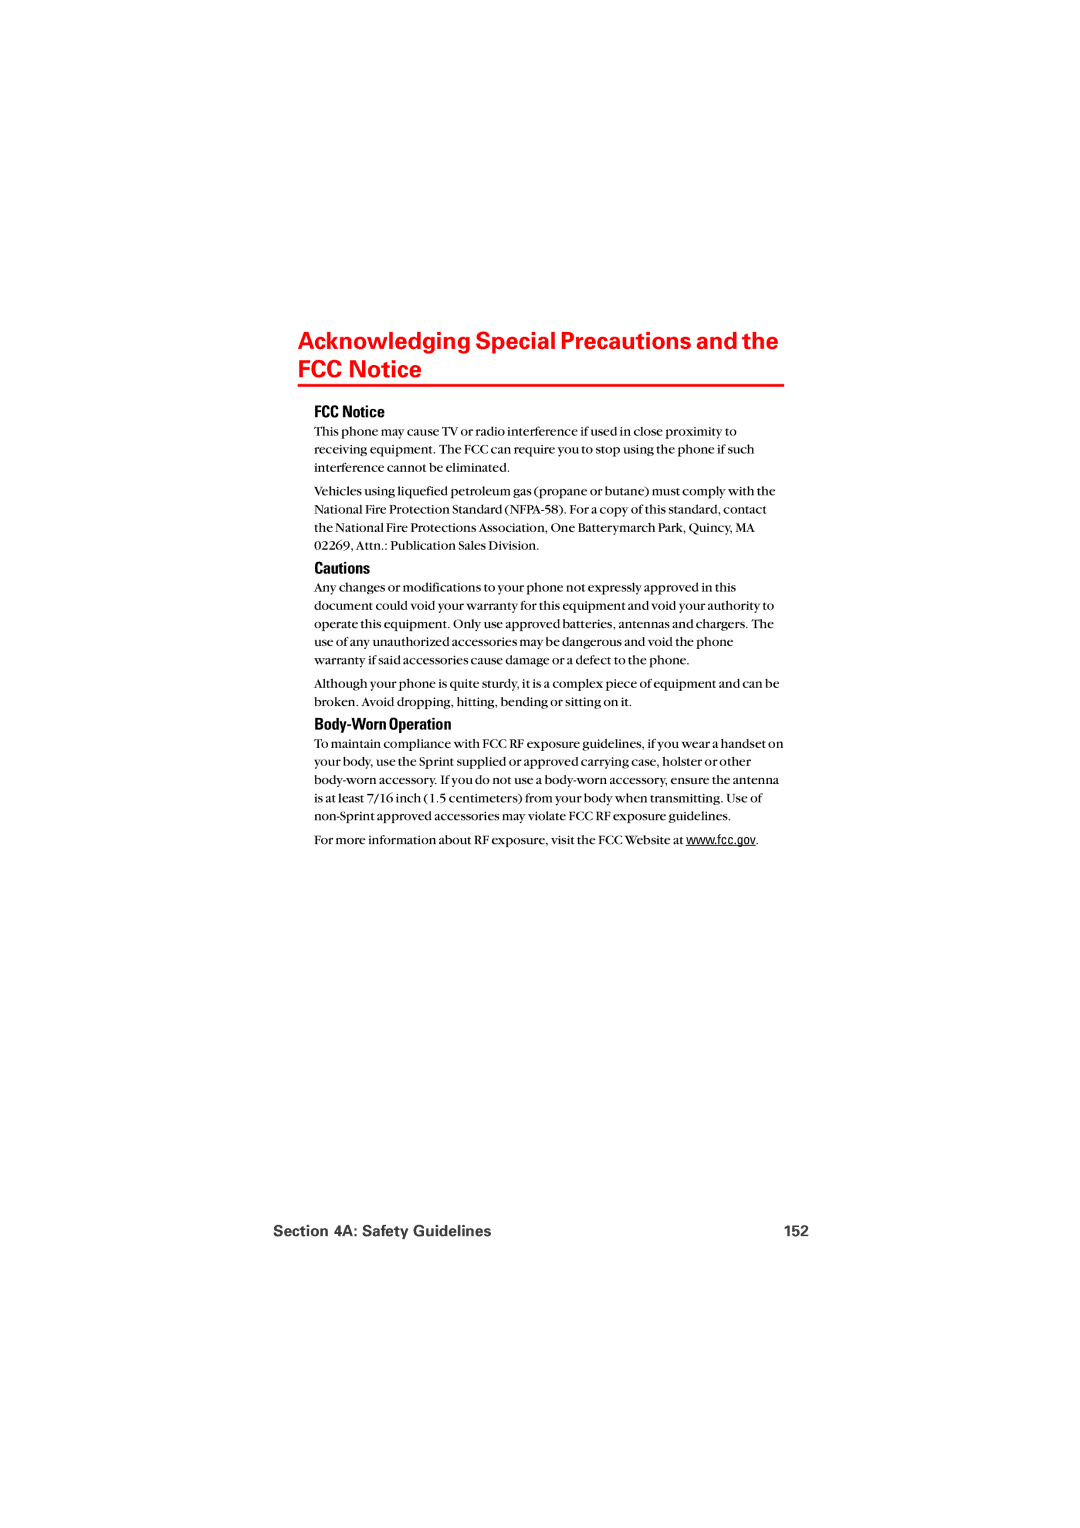 Sprint Nextel 8912 manual Acknowledging Special Precautions and the FCC Notice, Body-Worn Operation, Safety Guidelines 152 